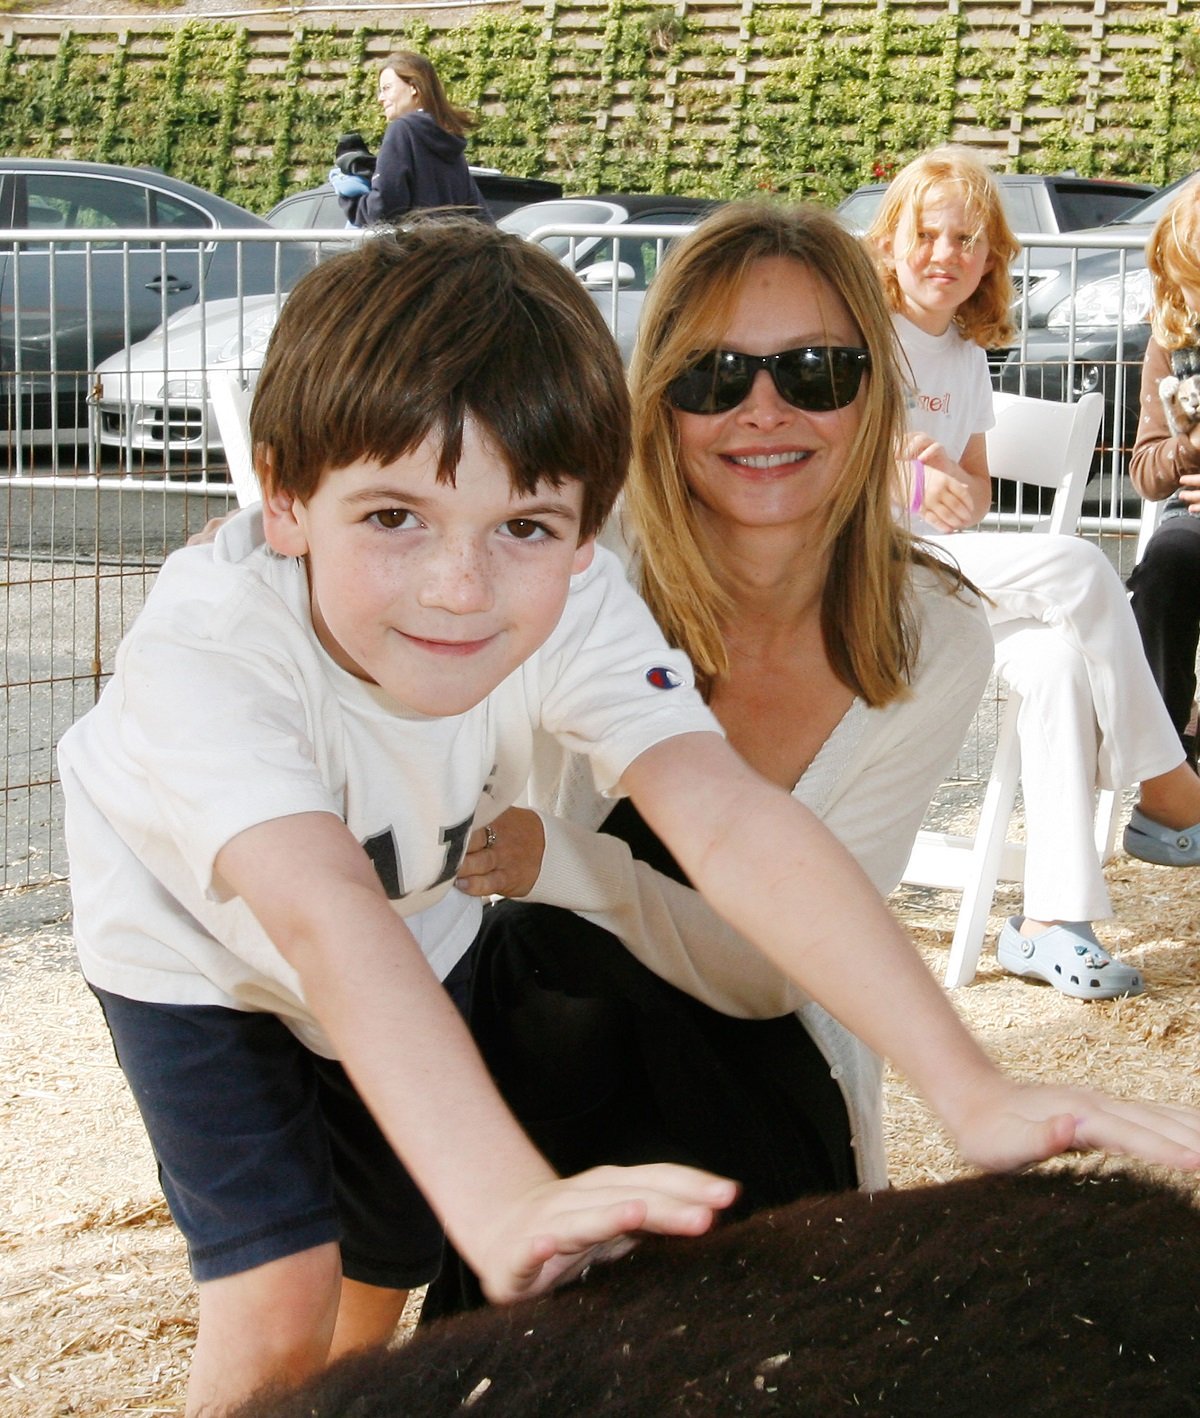 Calista Flockhart and her son, Liam, on November 4, 2007 in Santa Monica, California | Source: Getty Images